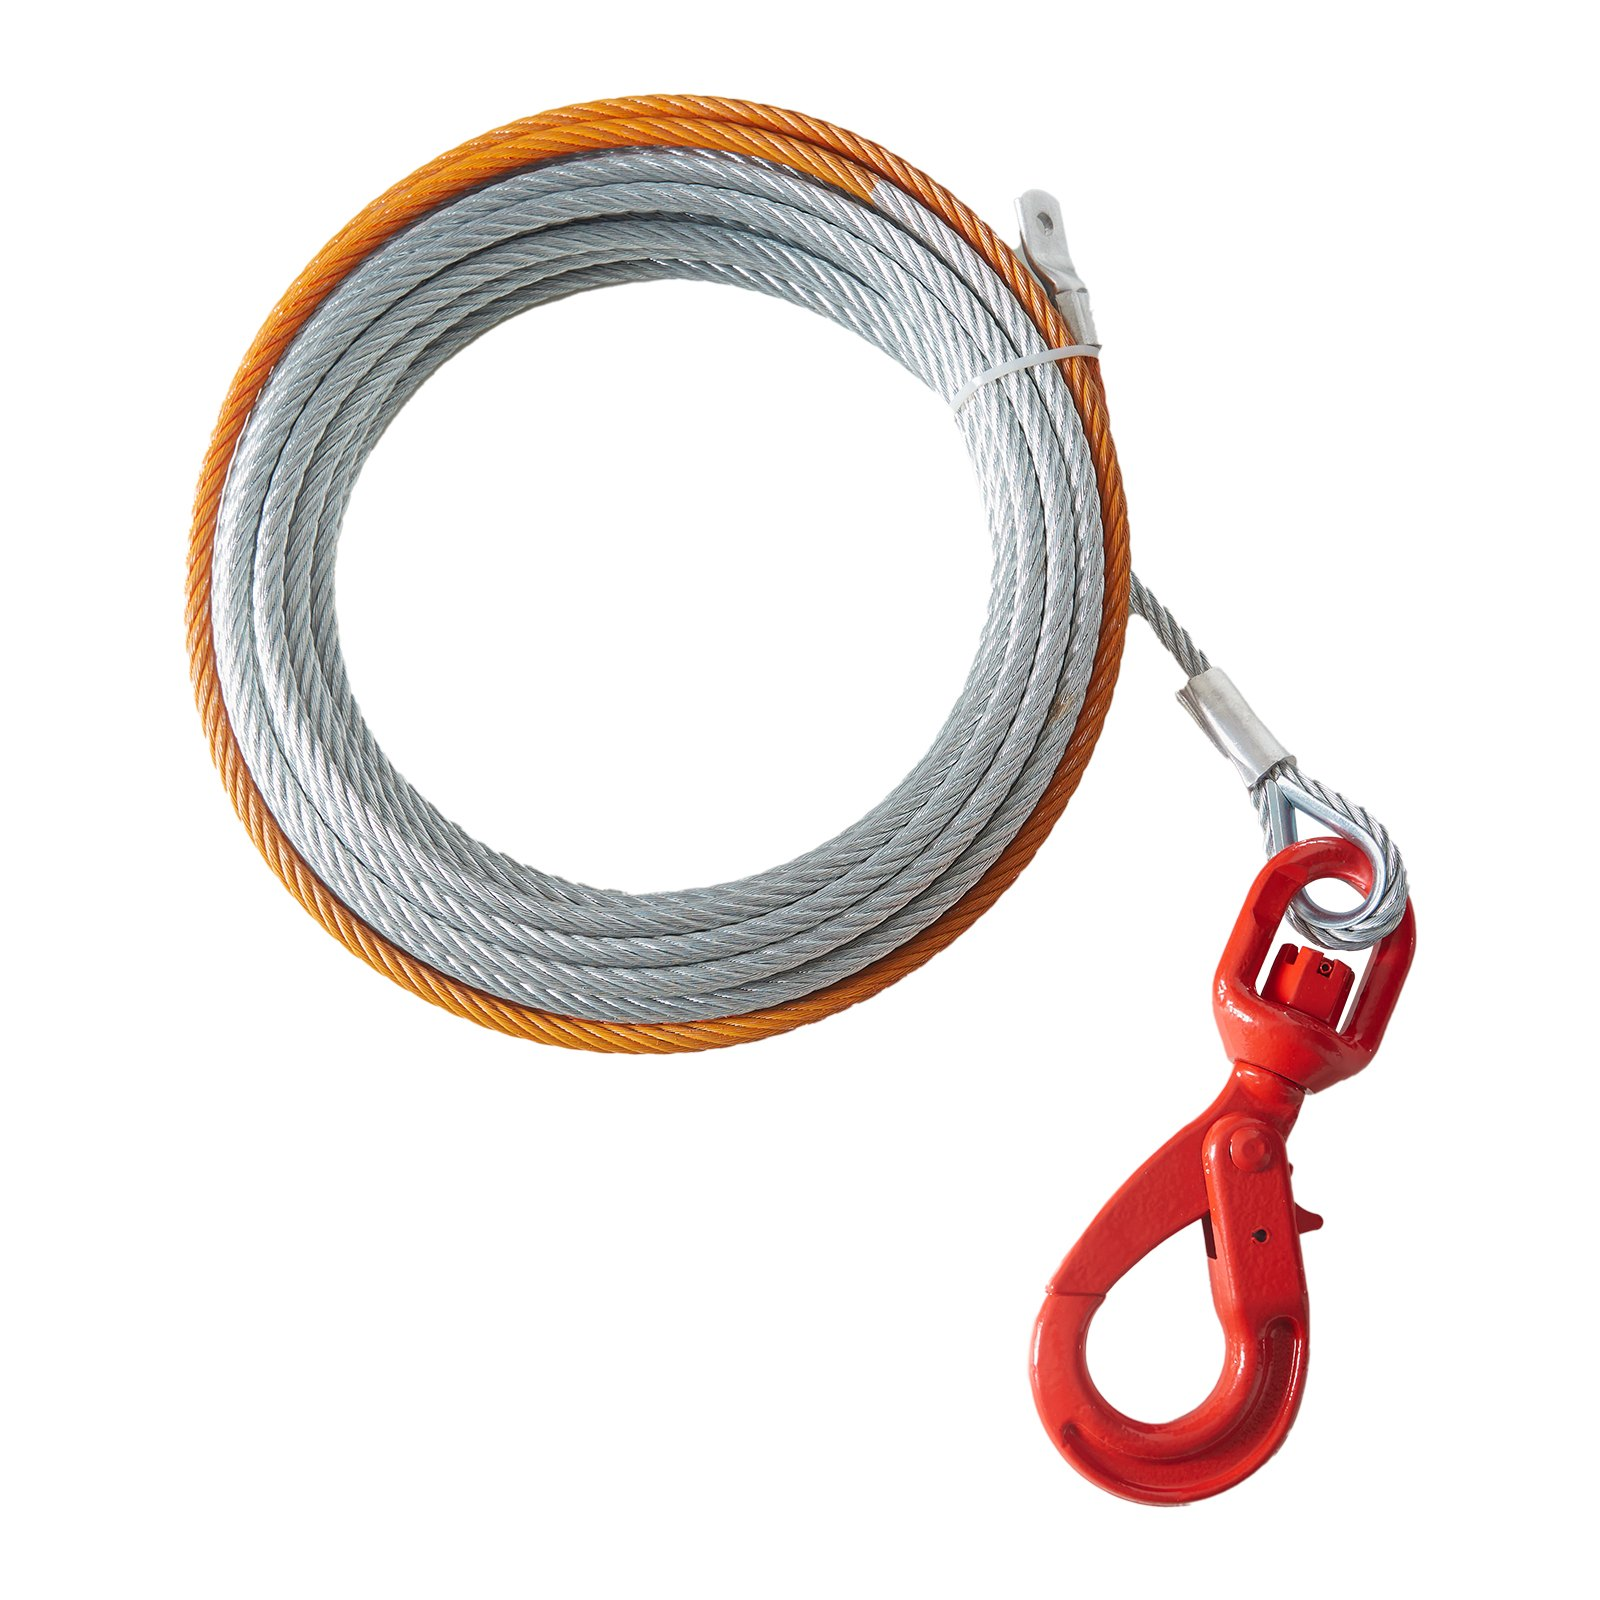 VEVOR Galvanized Steel Winch Cable, 3/8 Inch x 75 Feet 15,200 lbs Breaking Strength, Wire Winch Rope with Swivel Hook, Towing Cable Heavy Duty, Universal Fit for SUV, Large Off-Road Vehicle, Truck, Goodies N Stuff